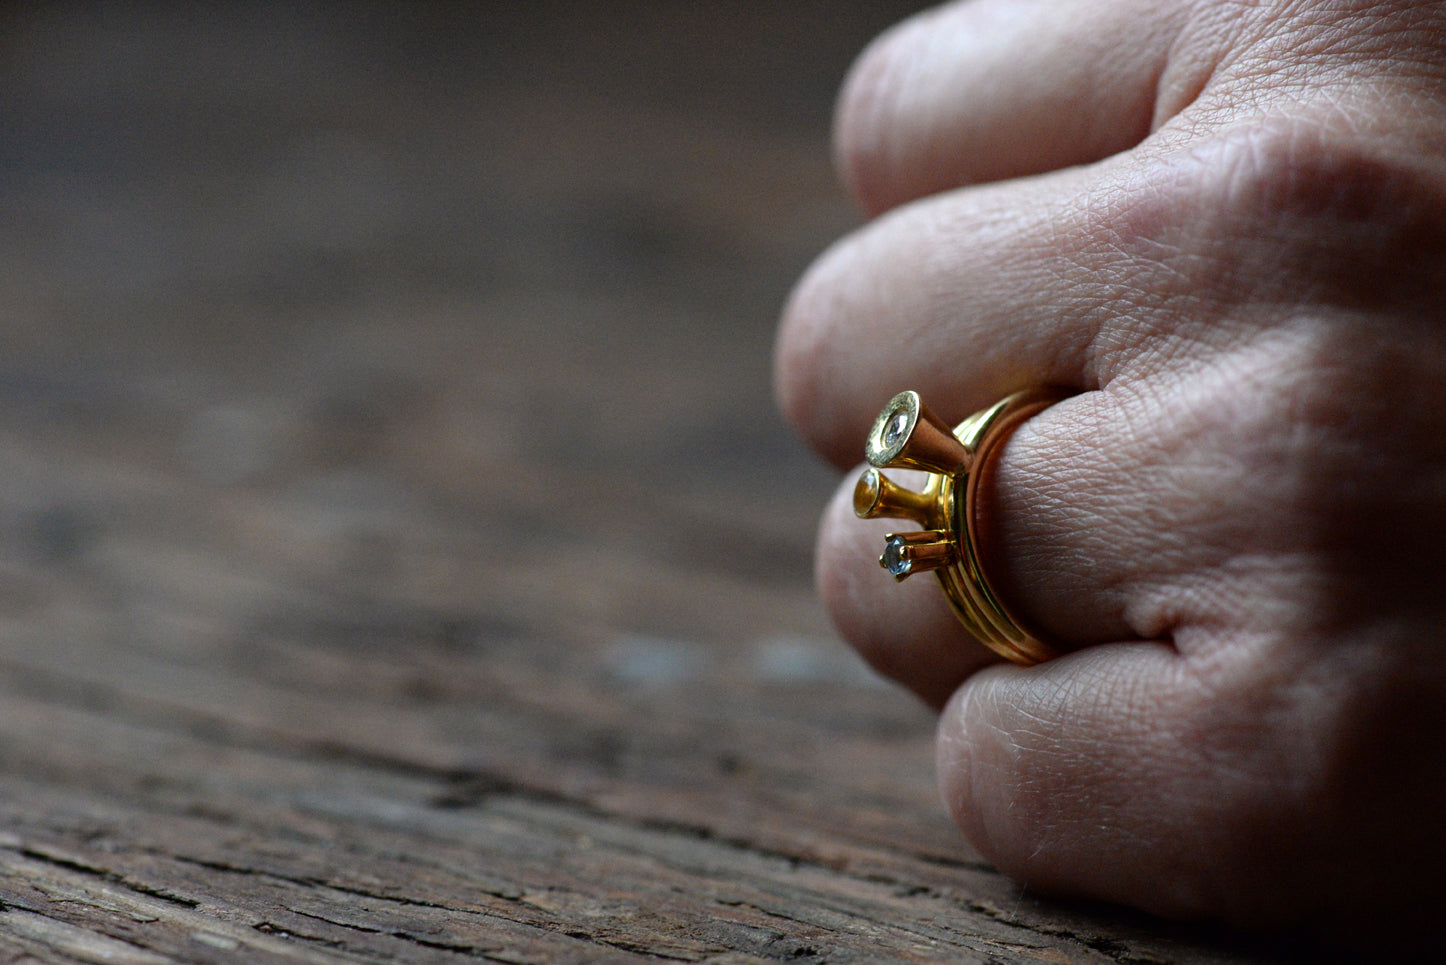 Solitaire Citrine Ring